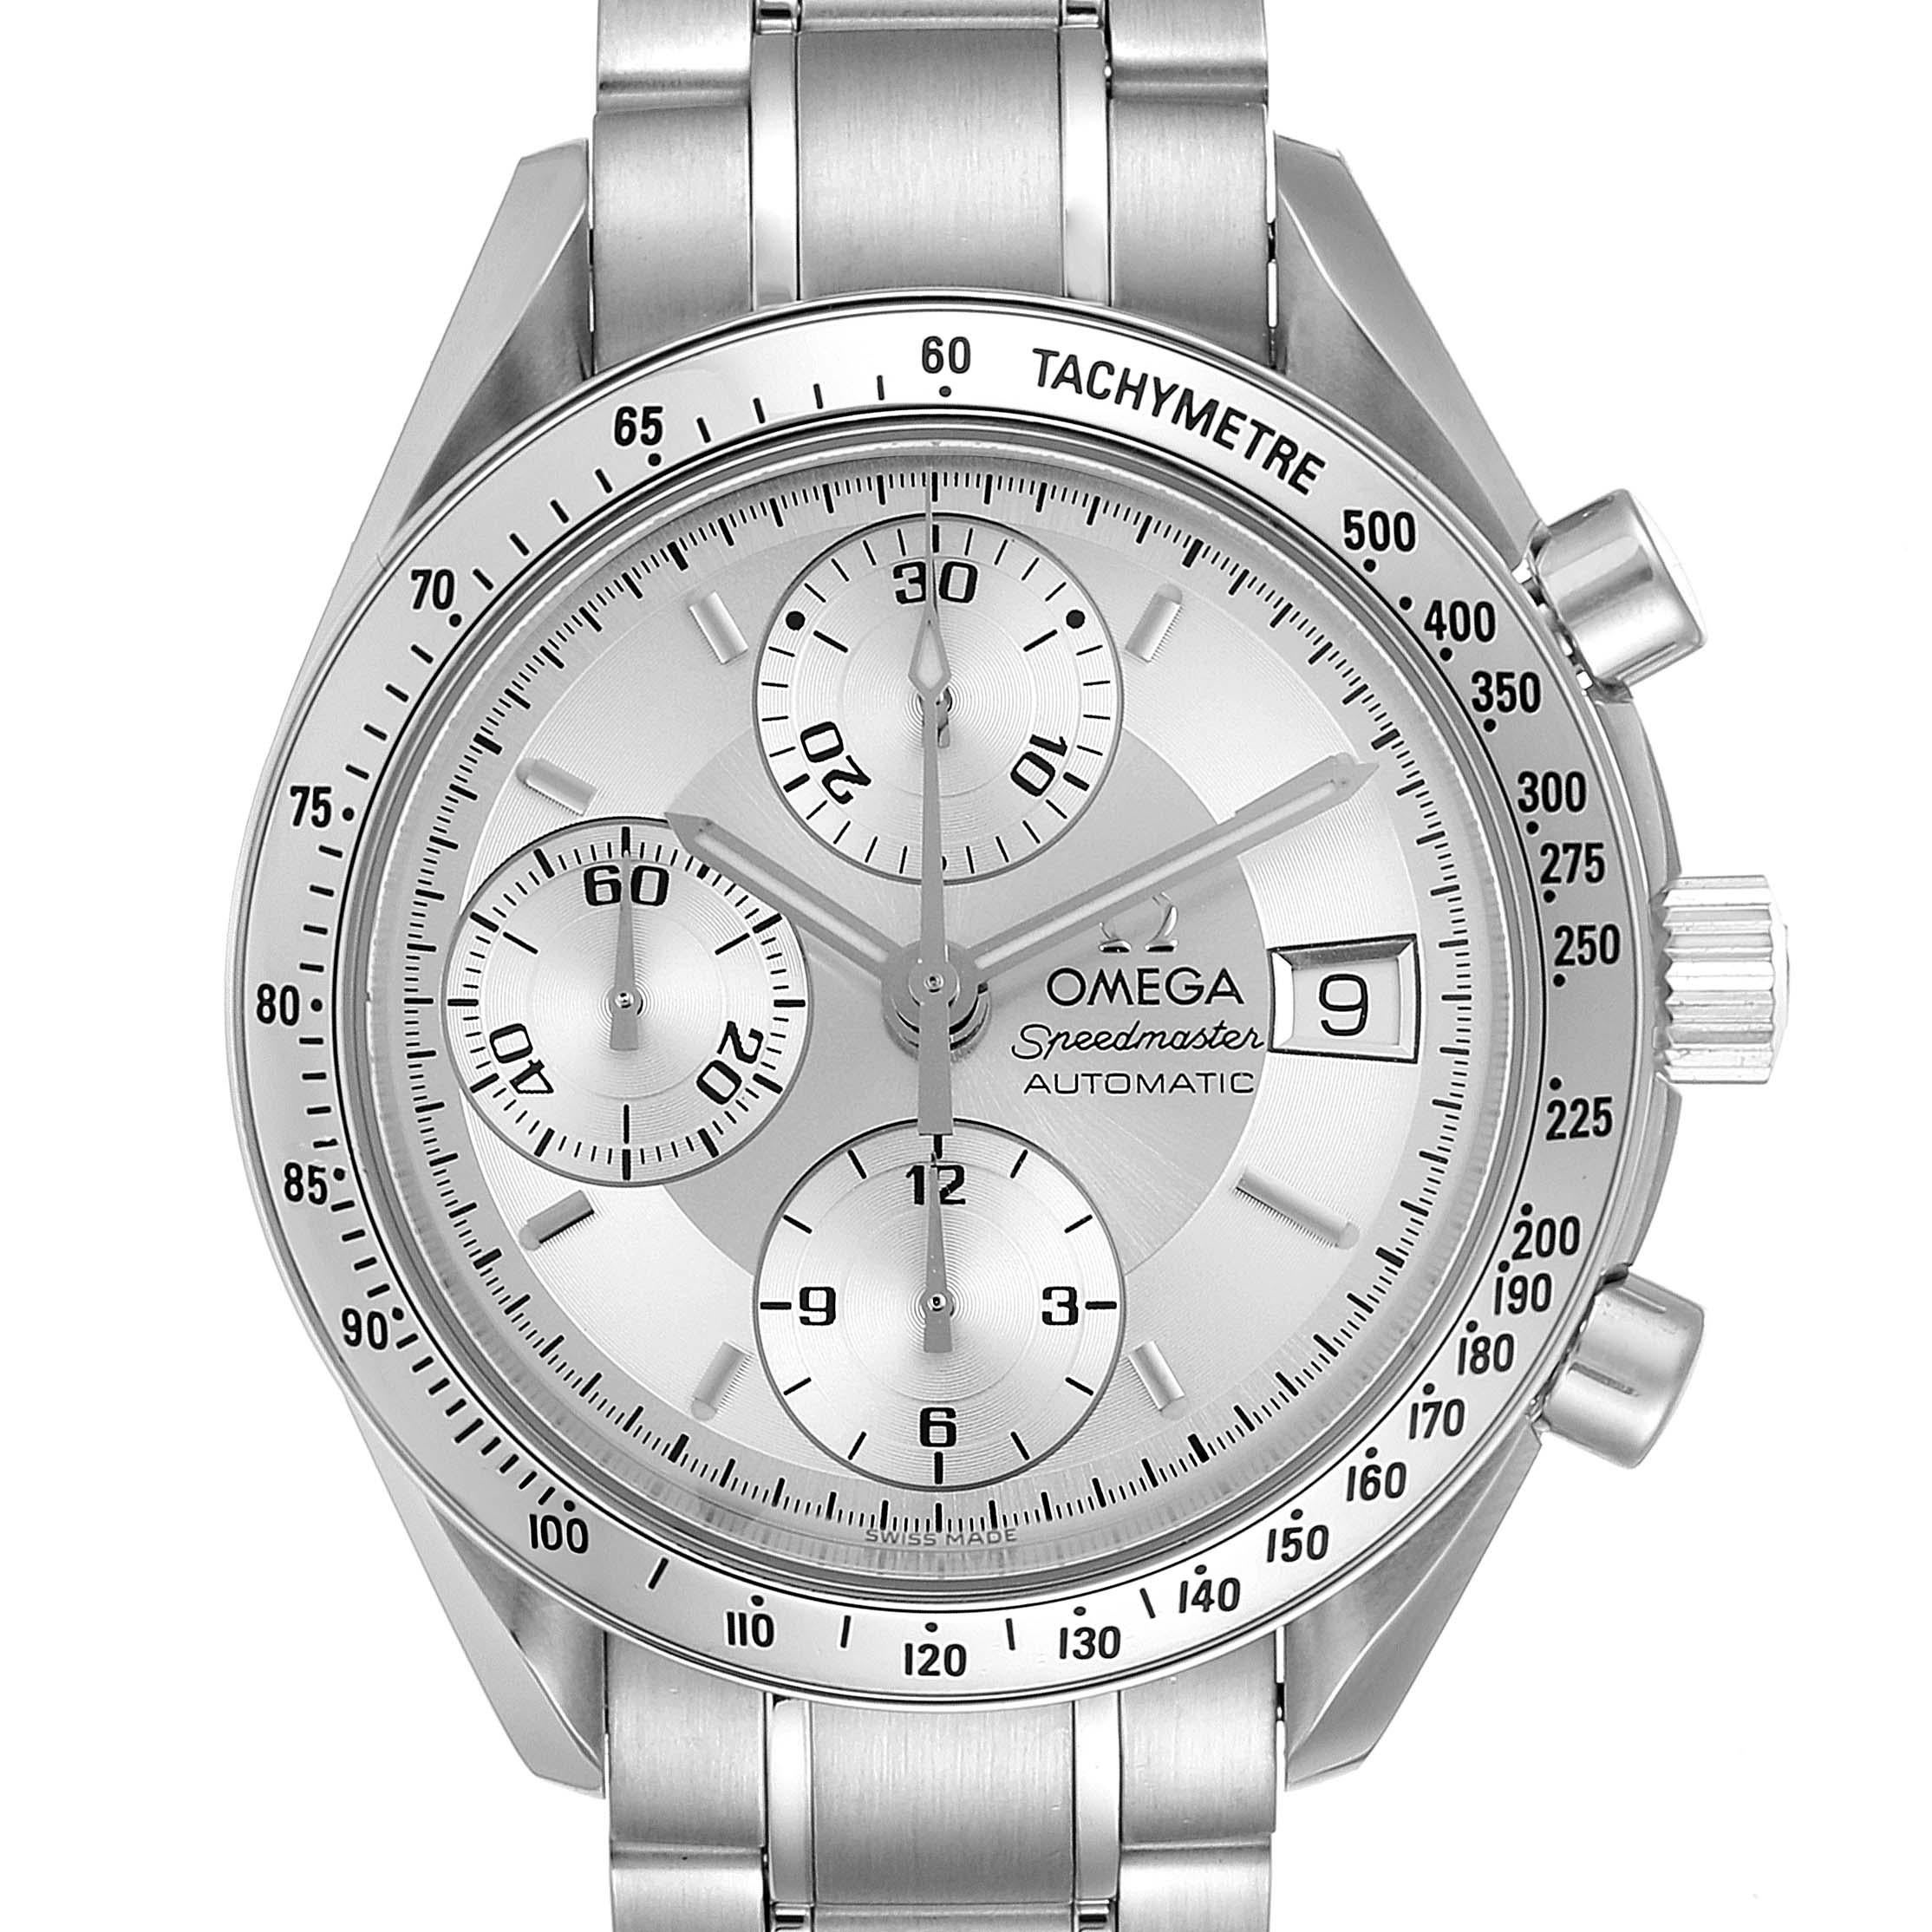 Omega Speedmaster Date Silver Dial Automatic Steel Mens Watch 3513.30.00. Automatic self-winding chronograph movement. Stainless steel round case 39 mm in diameter. Stainless steel bezel with tachymetre function. Scratch-resistant sapphire crystal